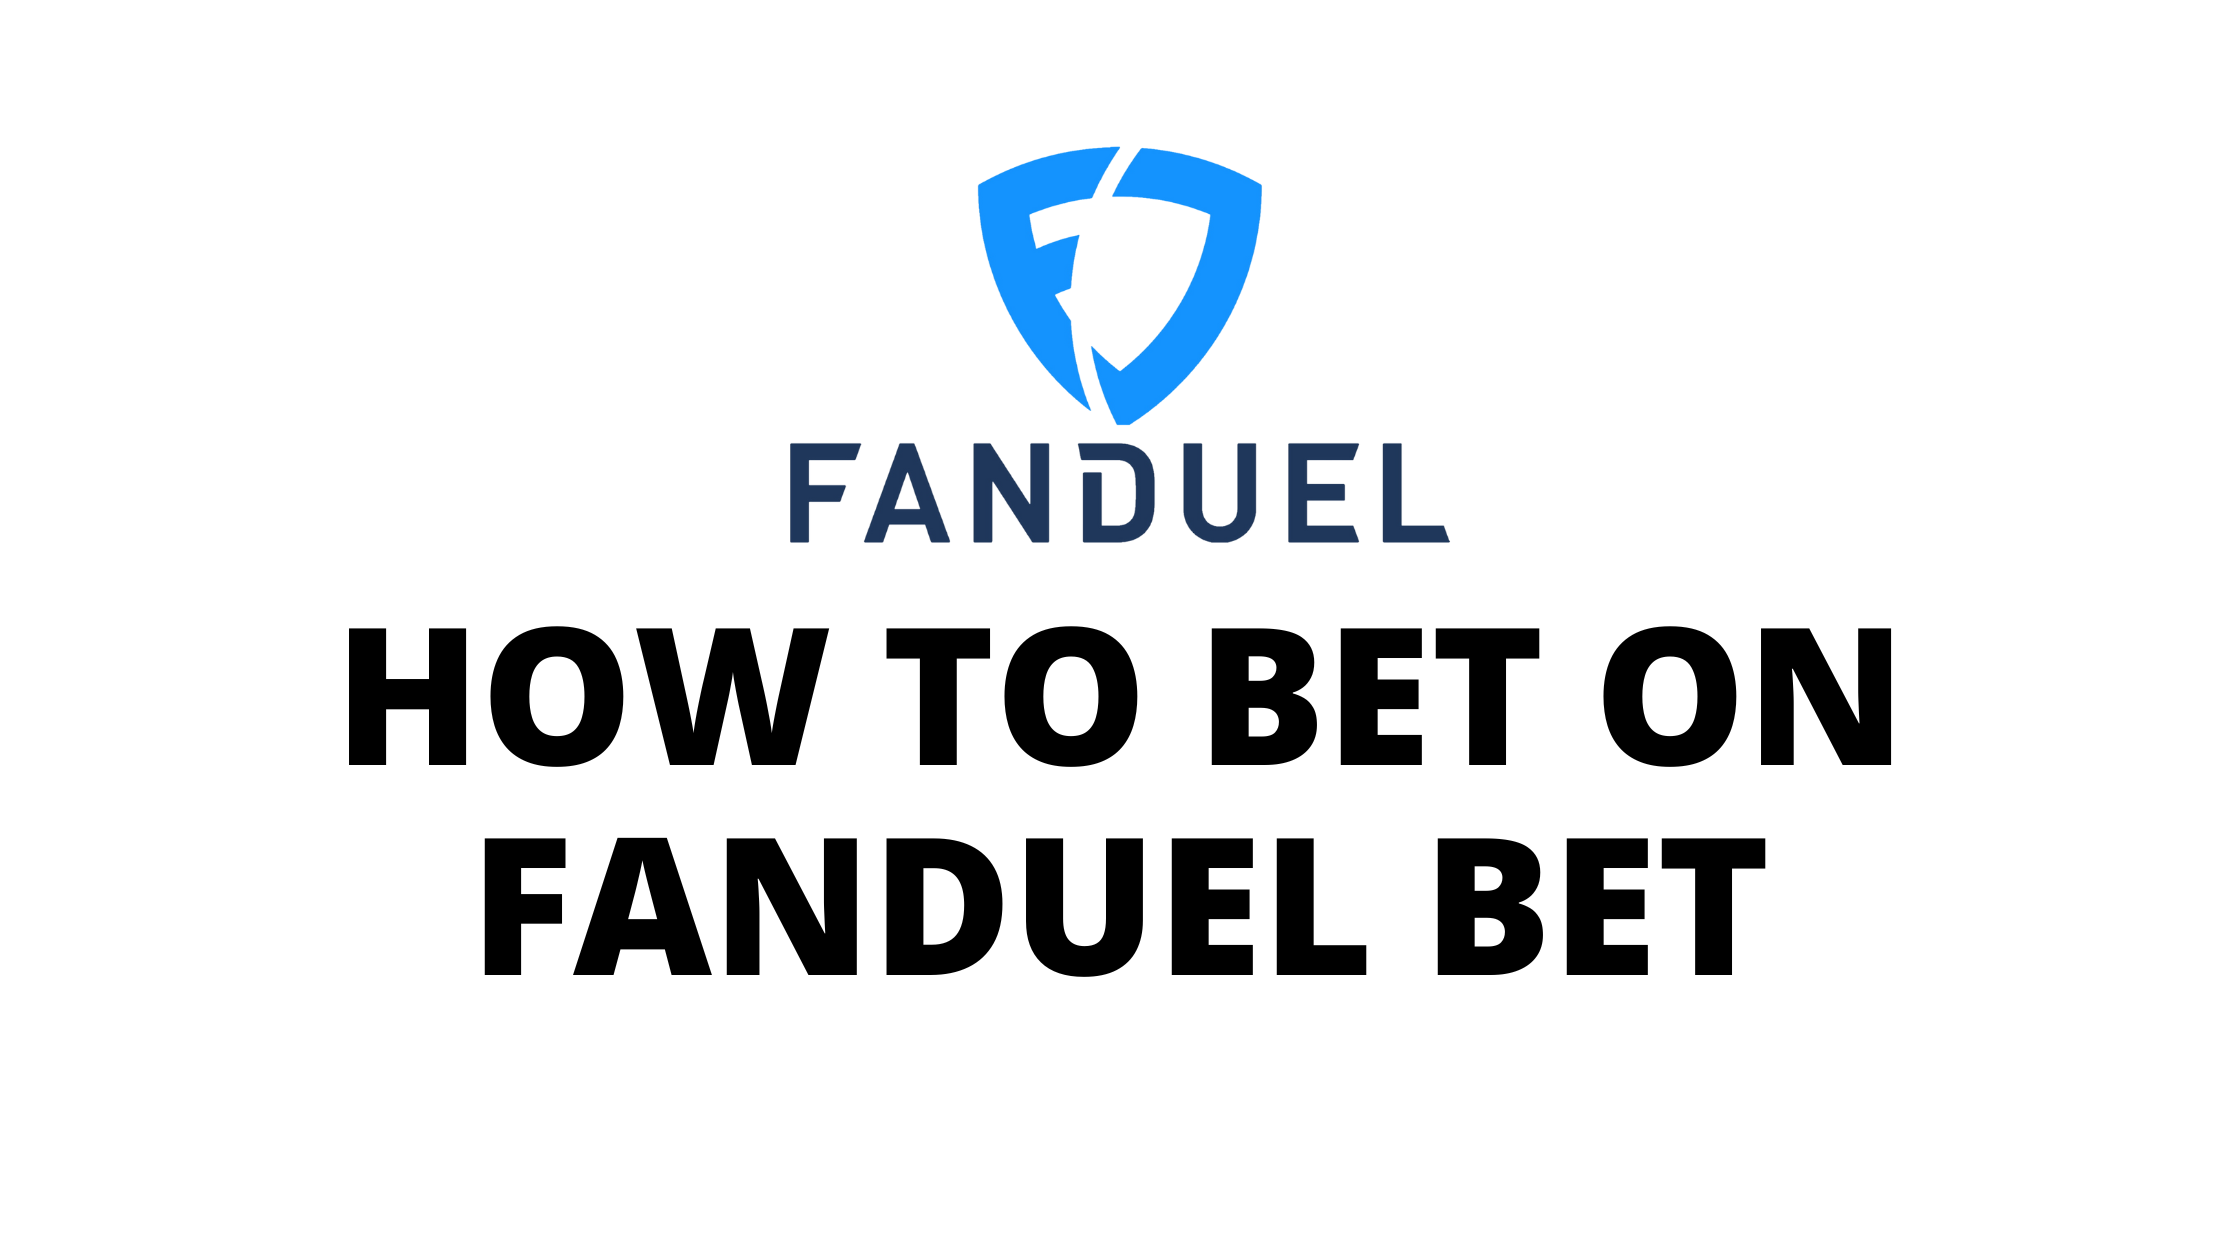 How to Bet on Fanduel